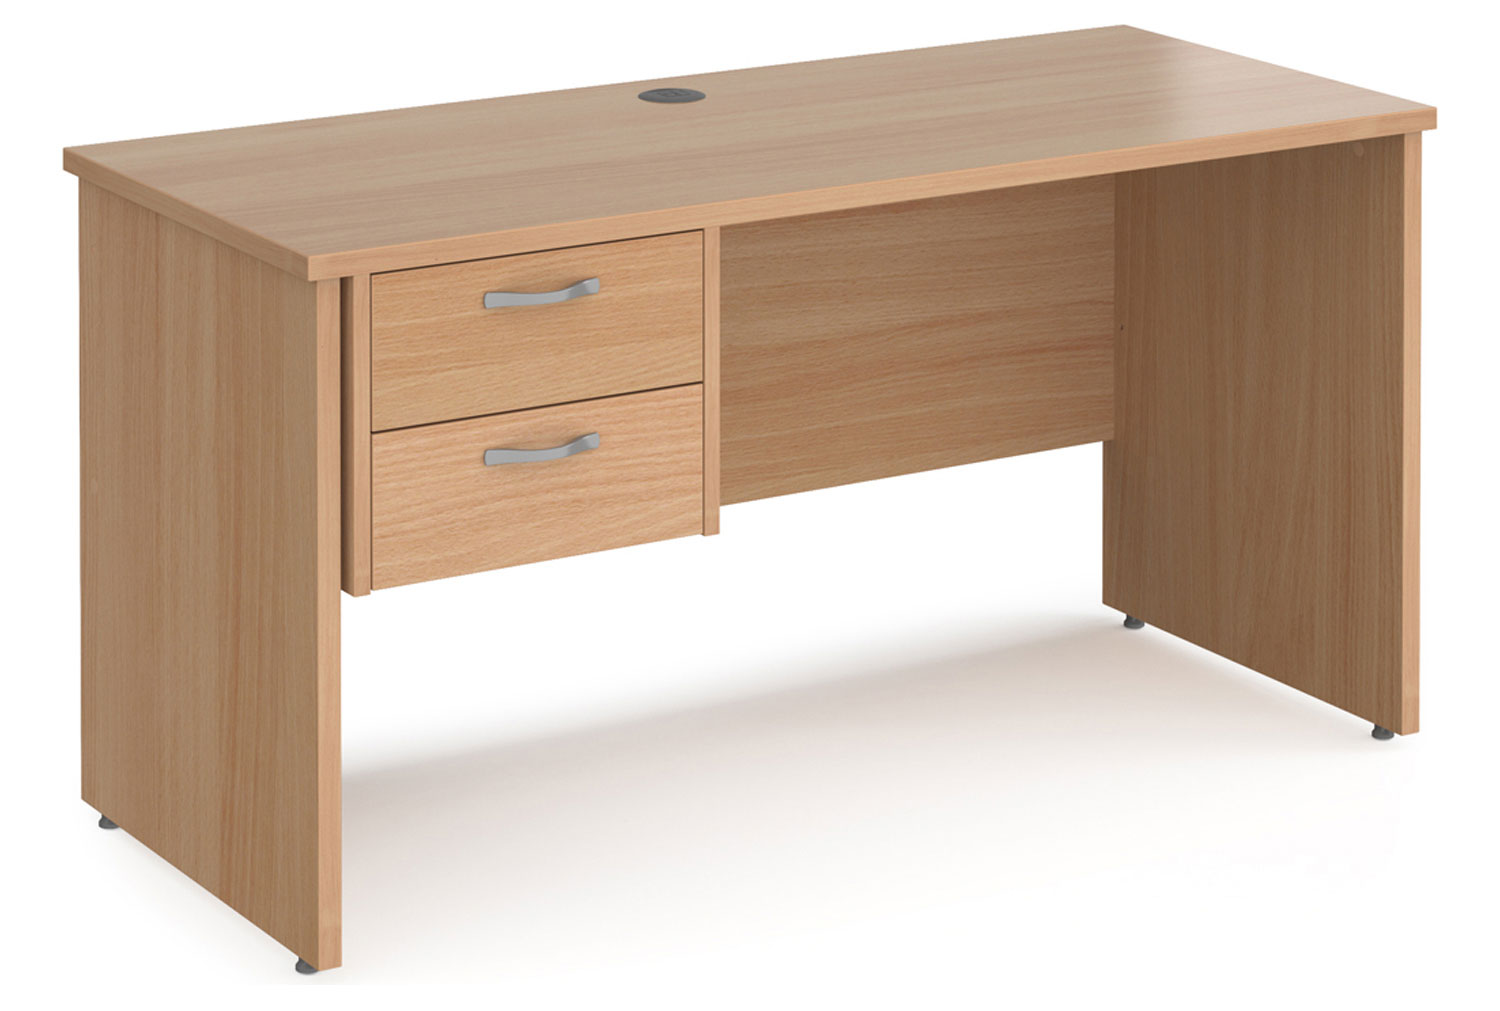 Value Line Deluxe Panel End Narrow Rectangular Office Desk 2 Drawers, 140wx60dx73h (cm), Beech, Fully Installed